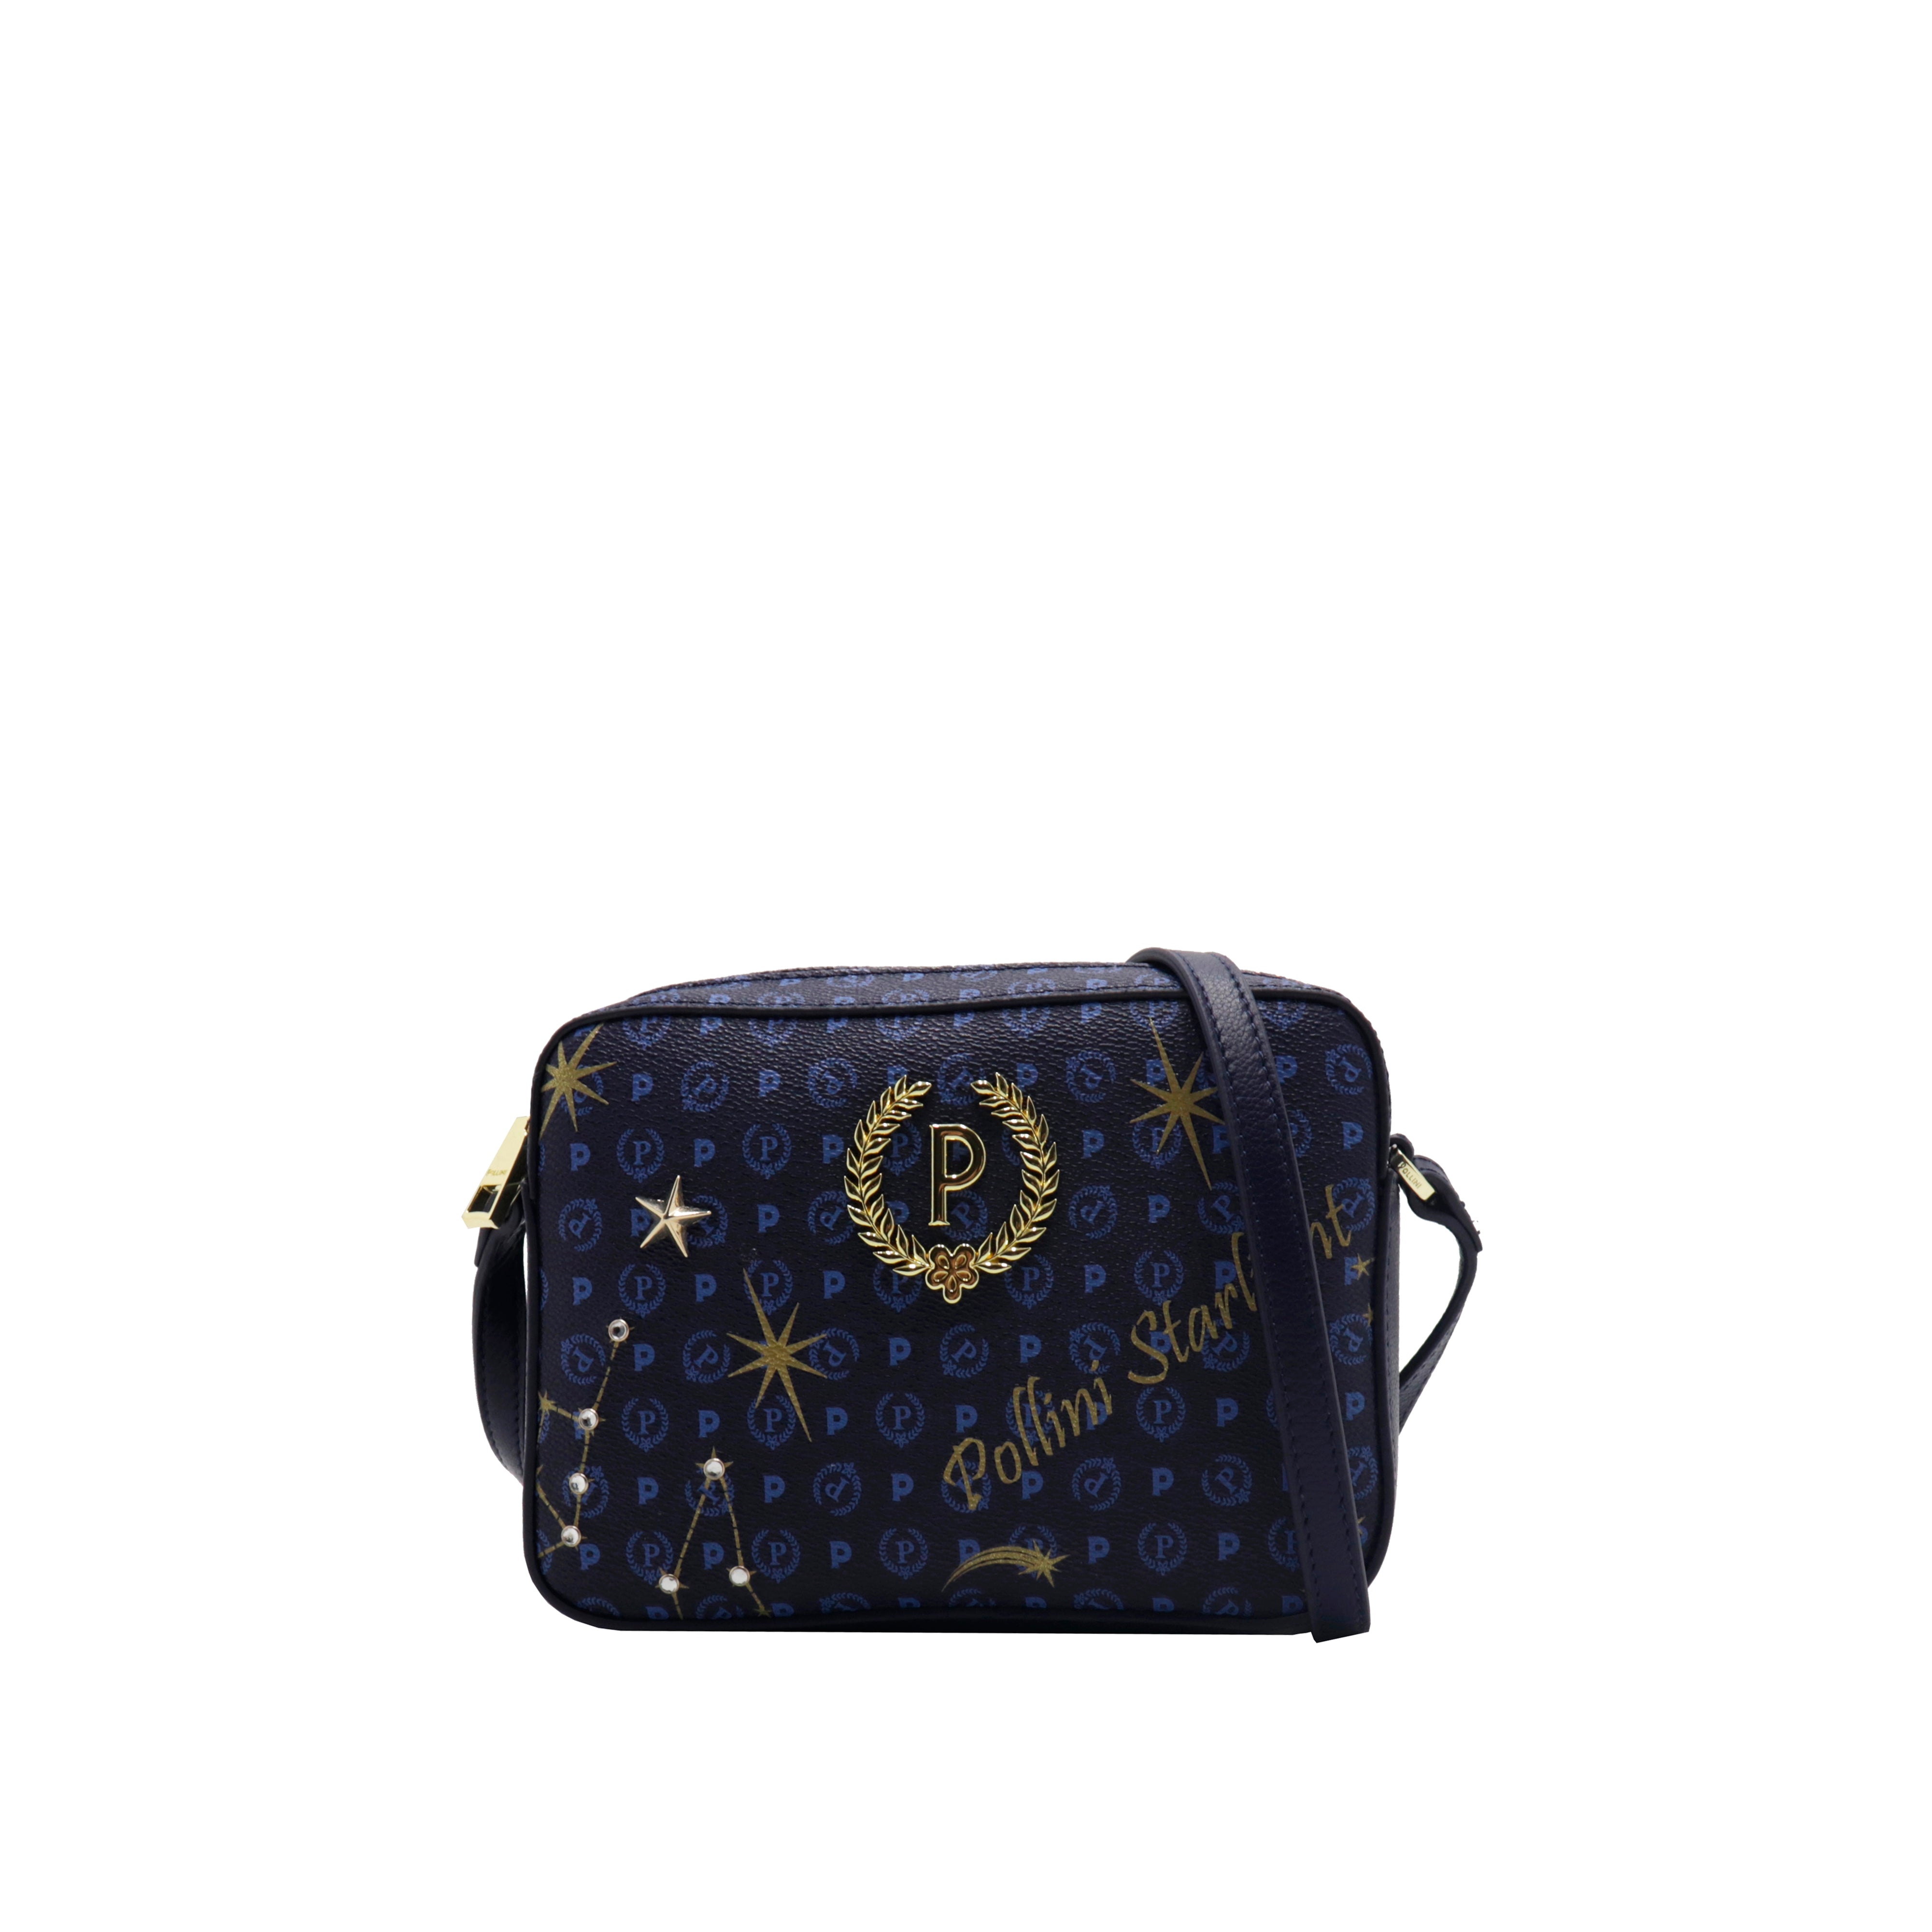 Pollini Starlight Shoulder Bag with Print in Blue and Black